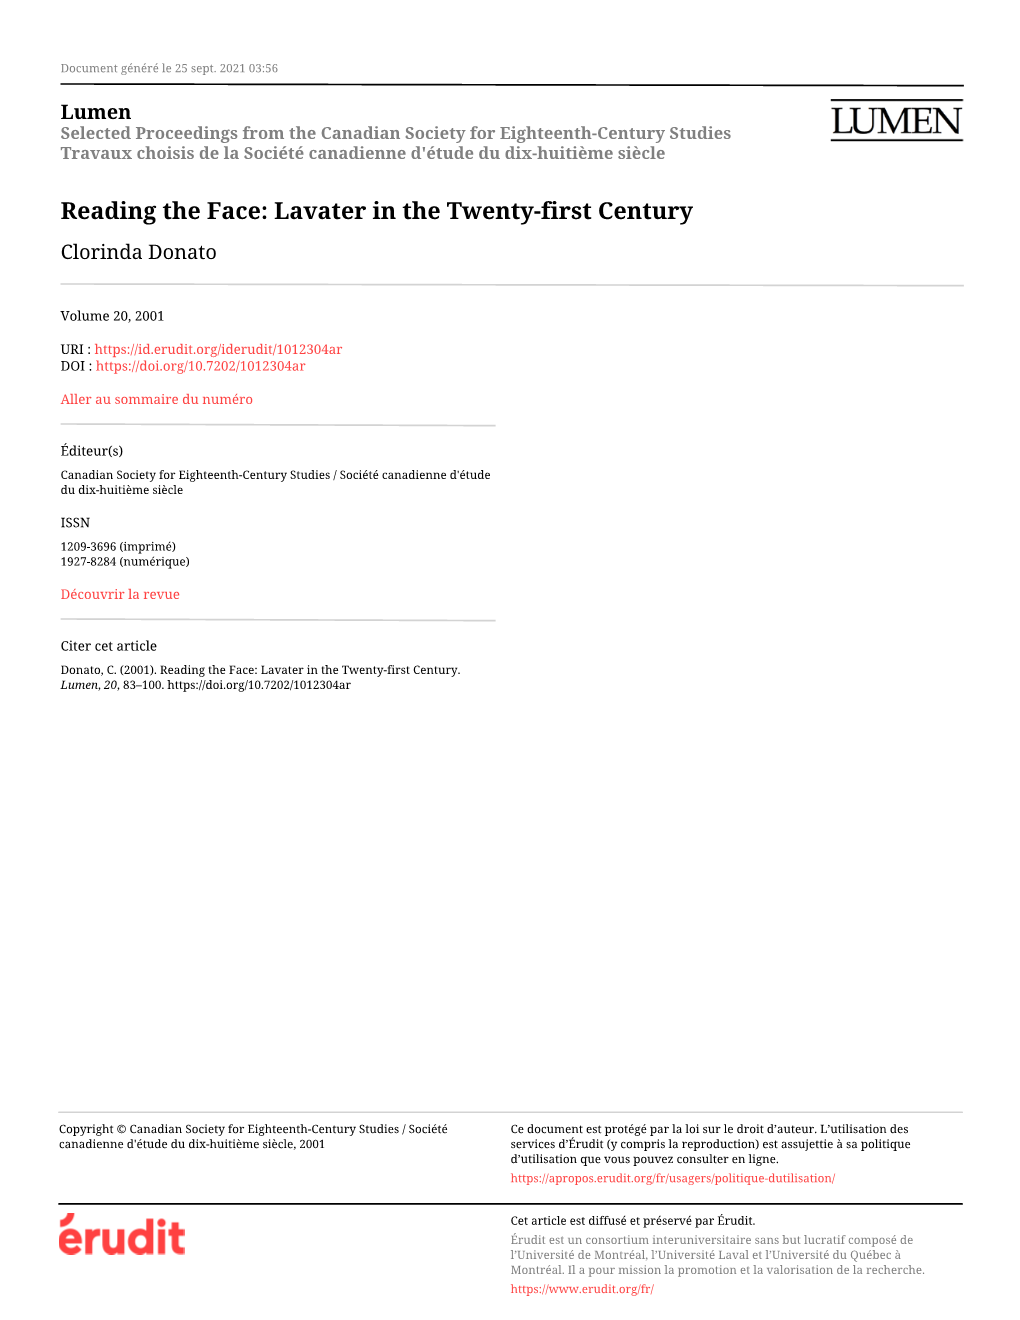 Reading the Face: Lavater in the Twenty-First Century Clorinda Donato